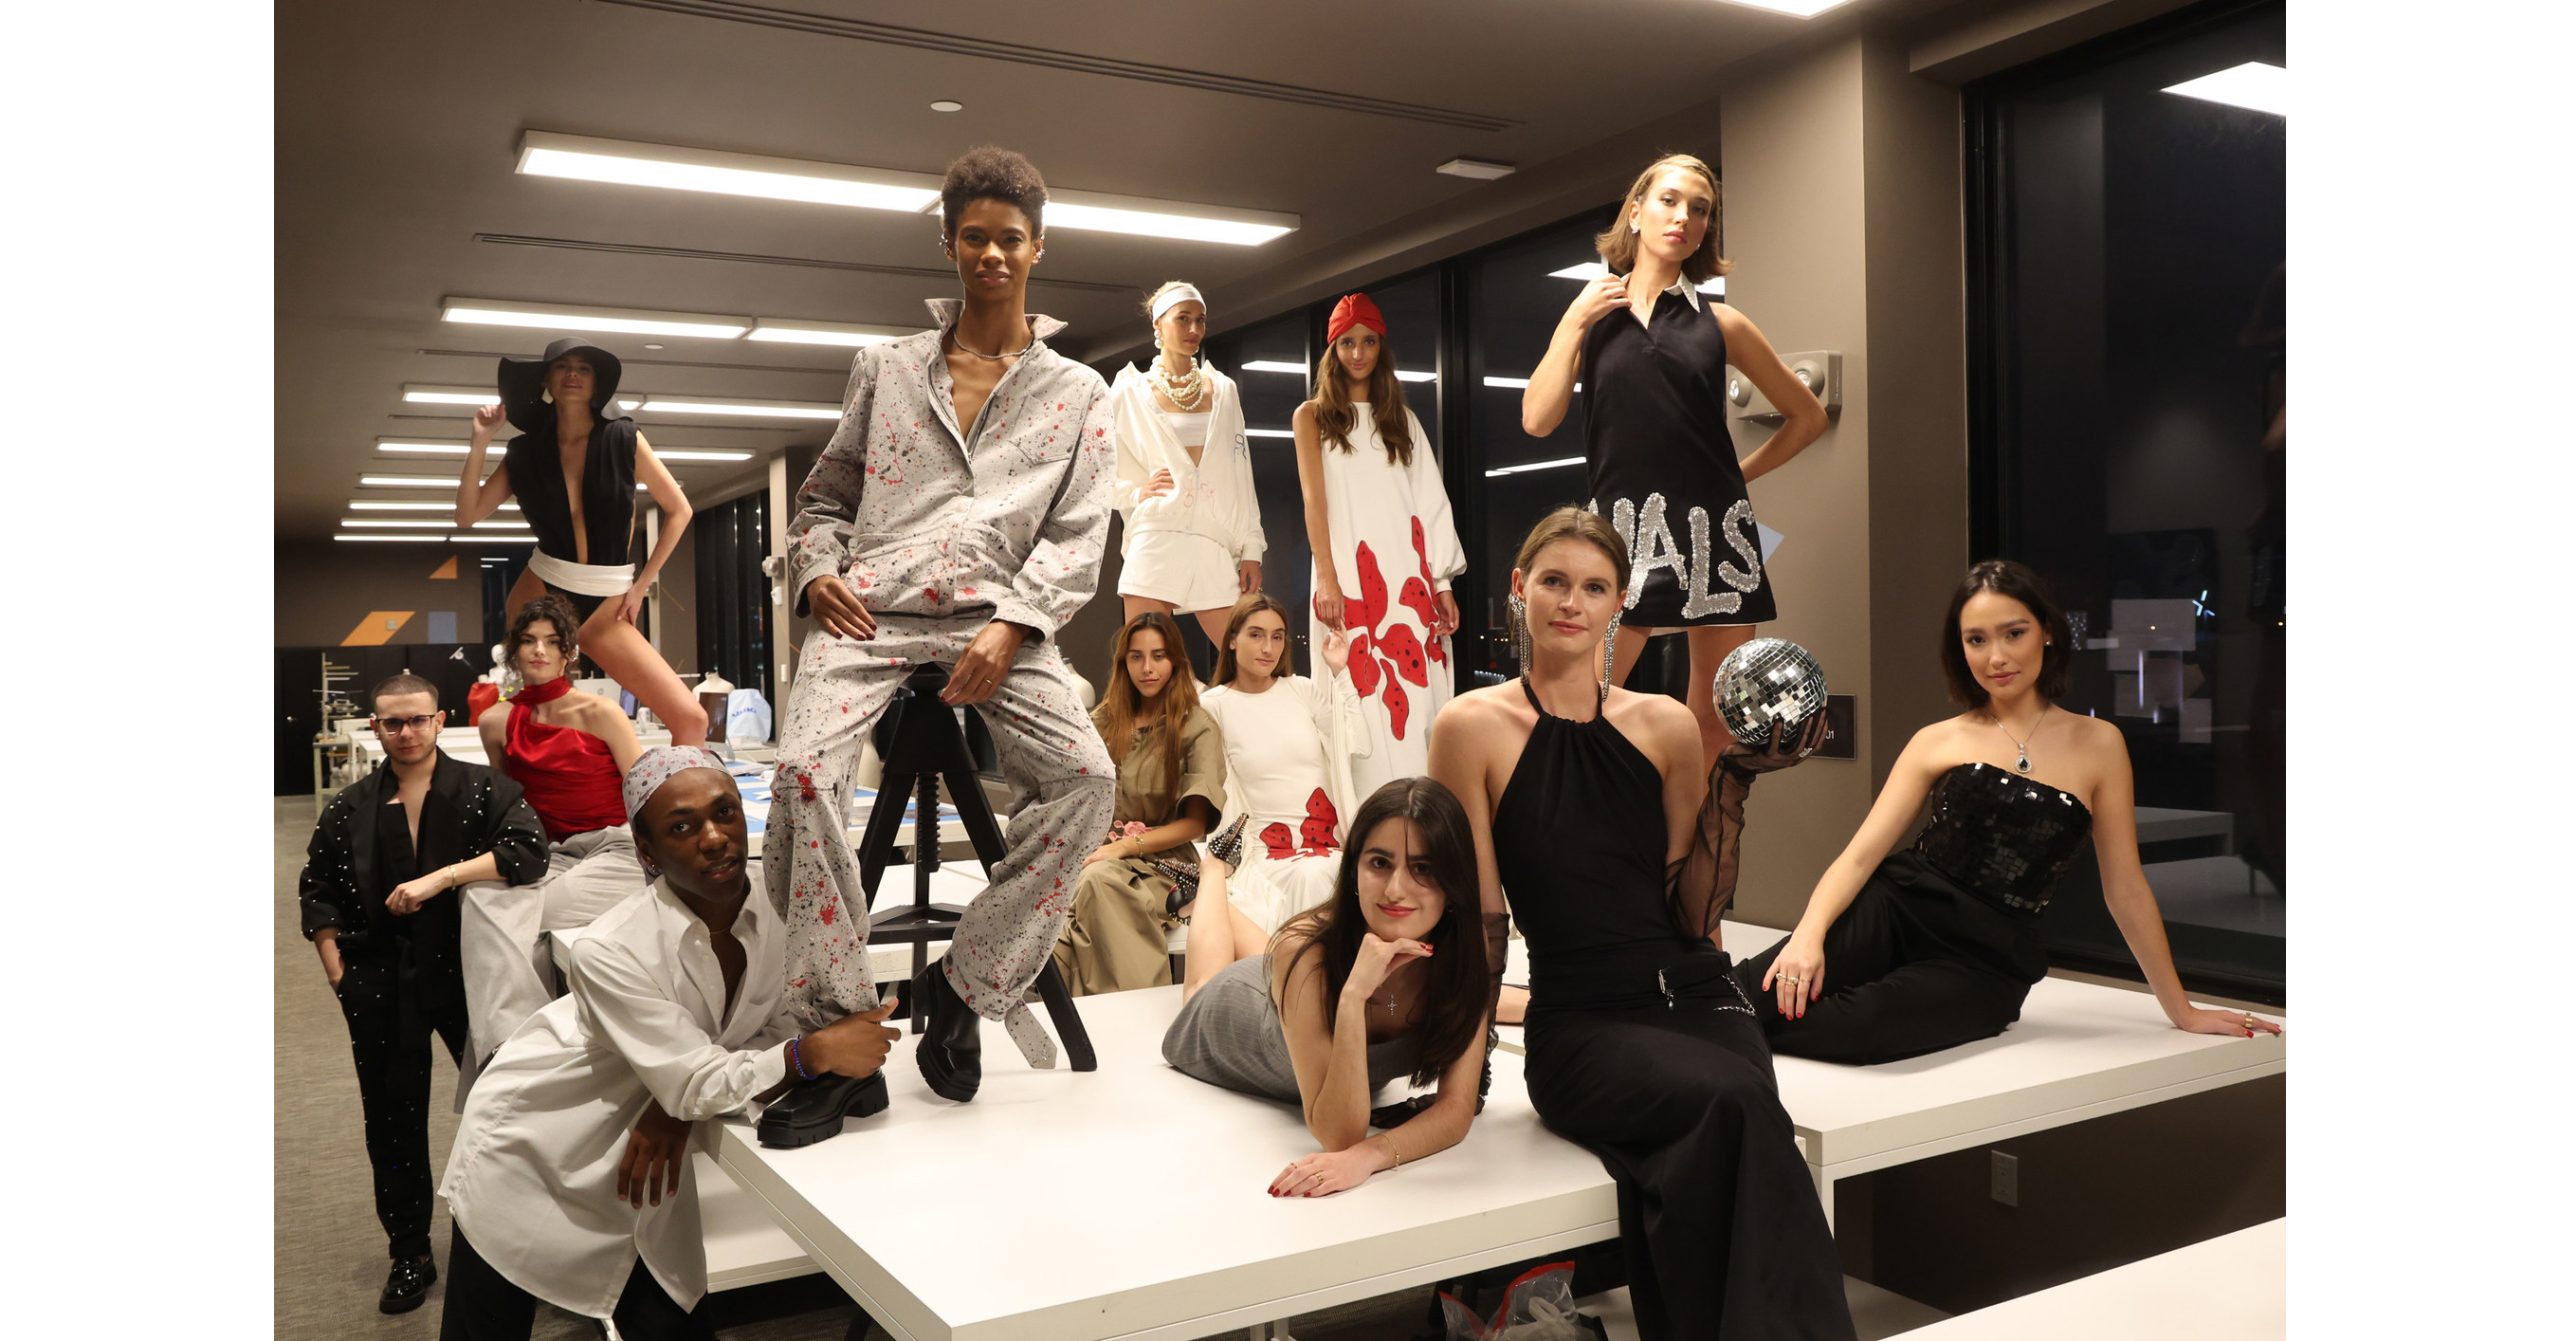 istituto-marangoni-miami-celebrated-with-vip-studded-studio-54-inspired-fashion-industry-event-featuring-with-love-halston-student-design-contest,-runway-show,-and-activations-–-pr-newswire